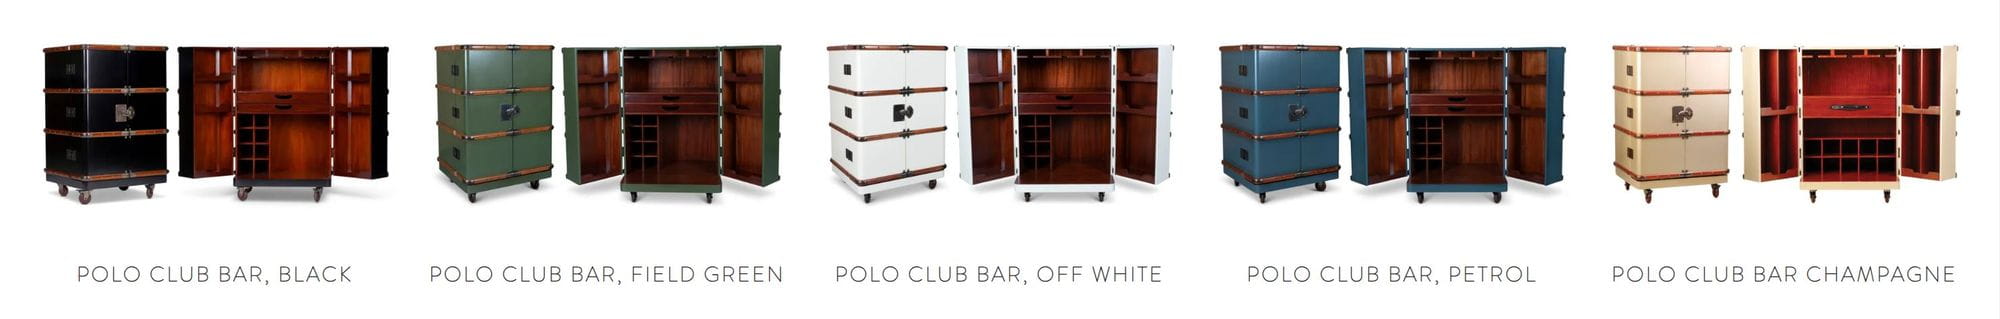 Authentic Models Polo Club Bar